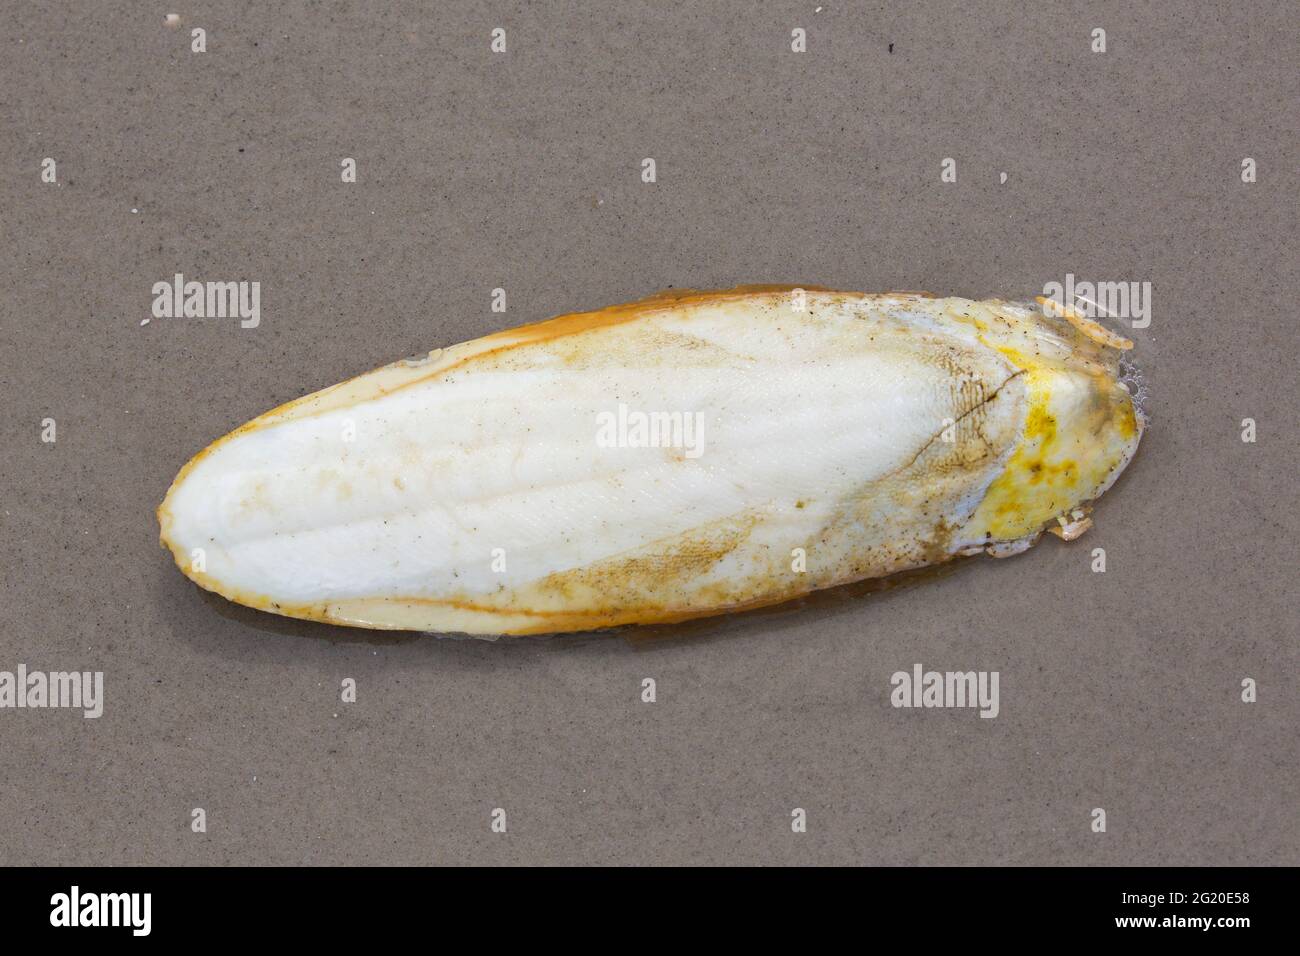 Cuttlebone washed ashore on sandy beach, buoyancy organ and internal shell of the European common cuttlefish / cuttles (Sepia officinalis) Stock Photo